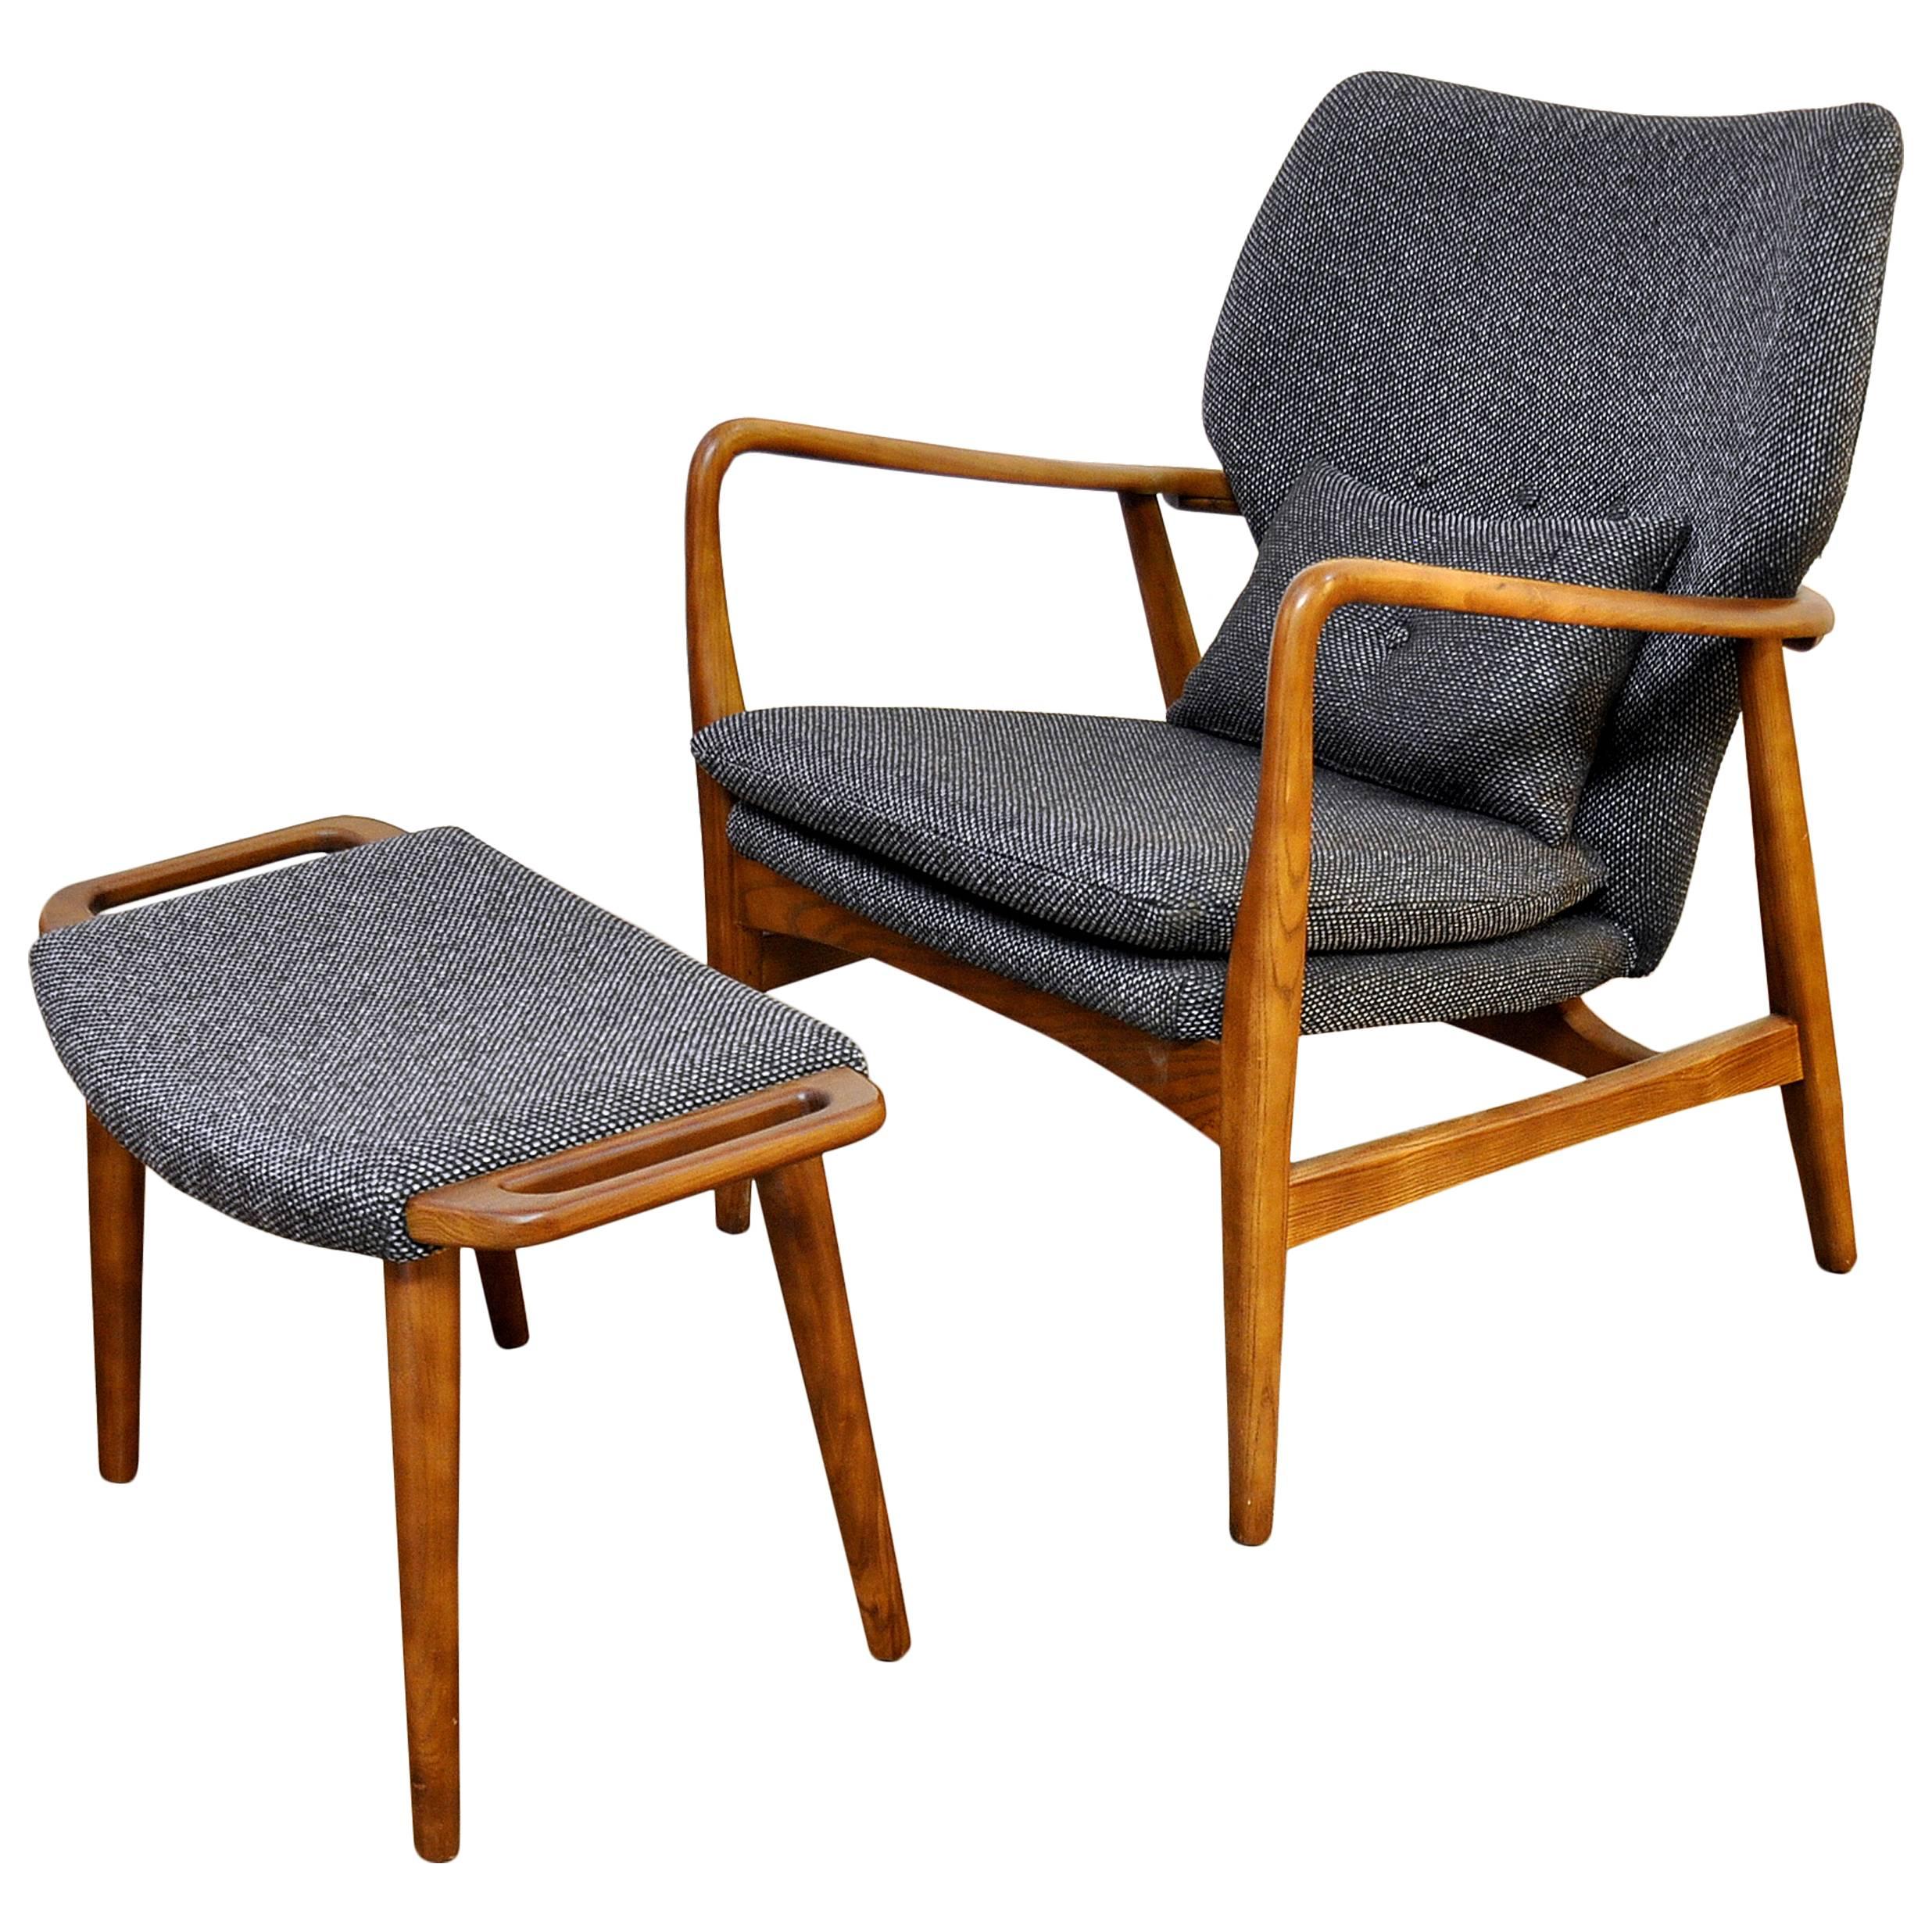 Madsen and Schubell Lounge Chair and Ottoman, Denmark, circa 1955